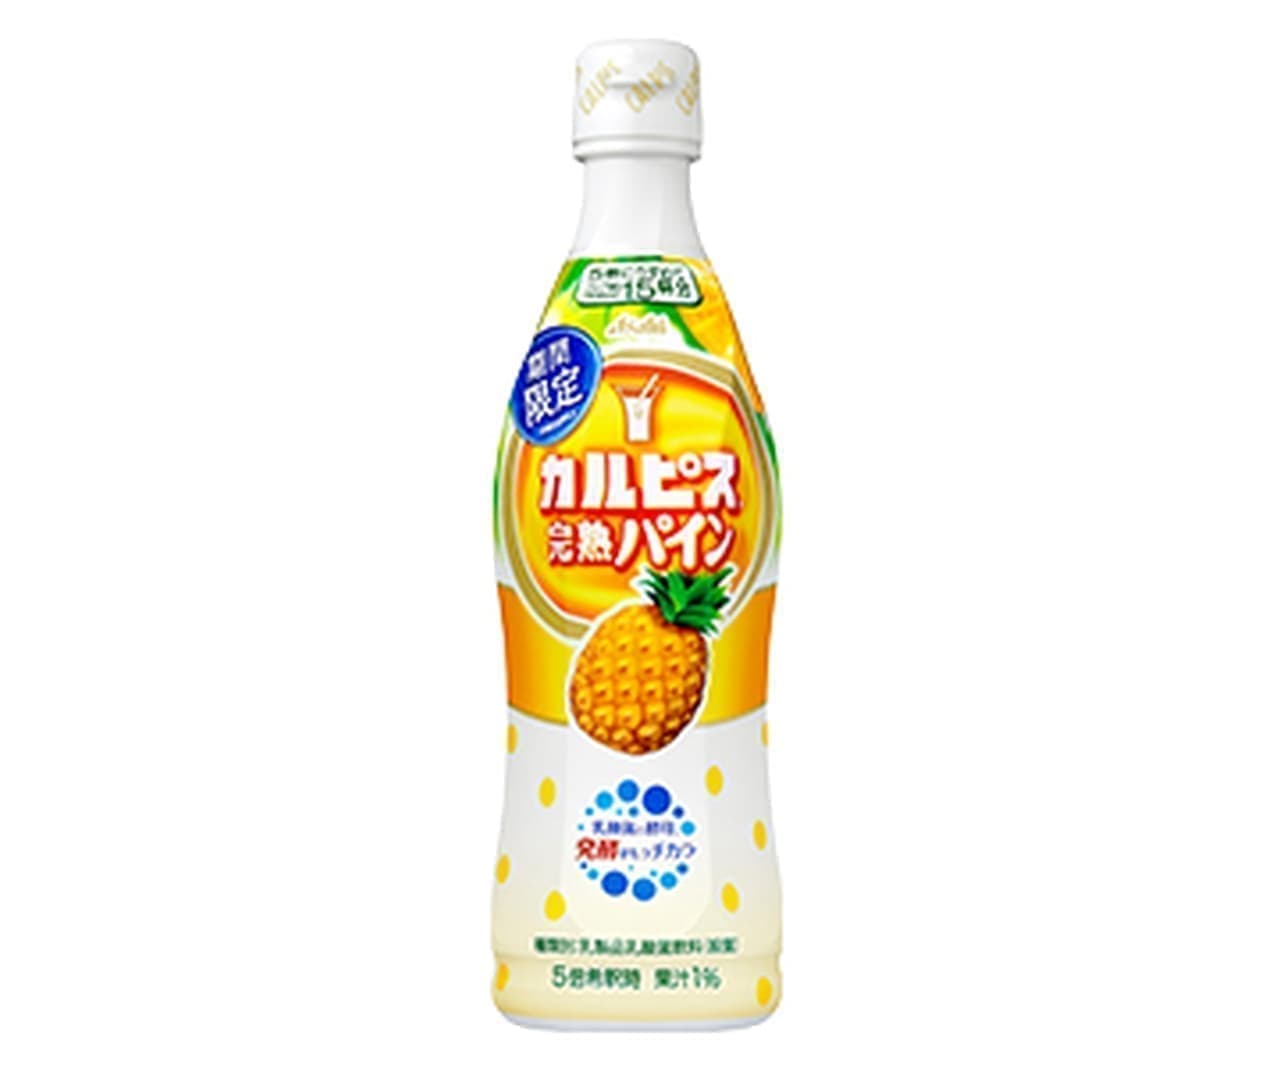 Limited time offer "'Calpis' ripe pineapple"